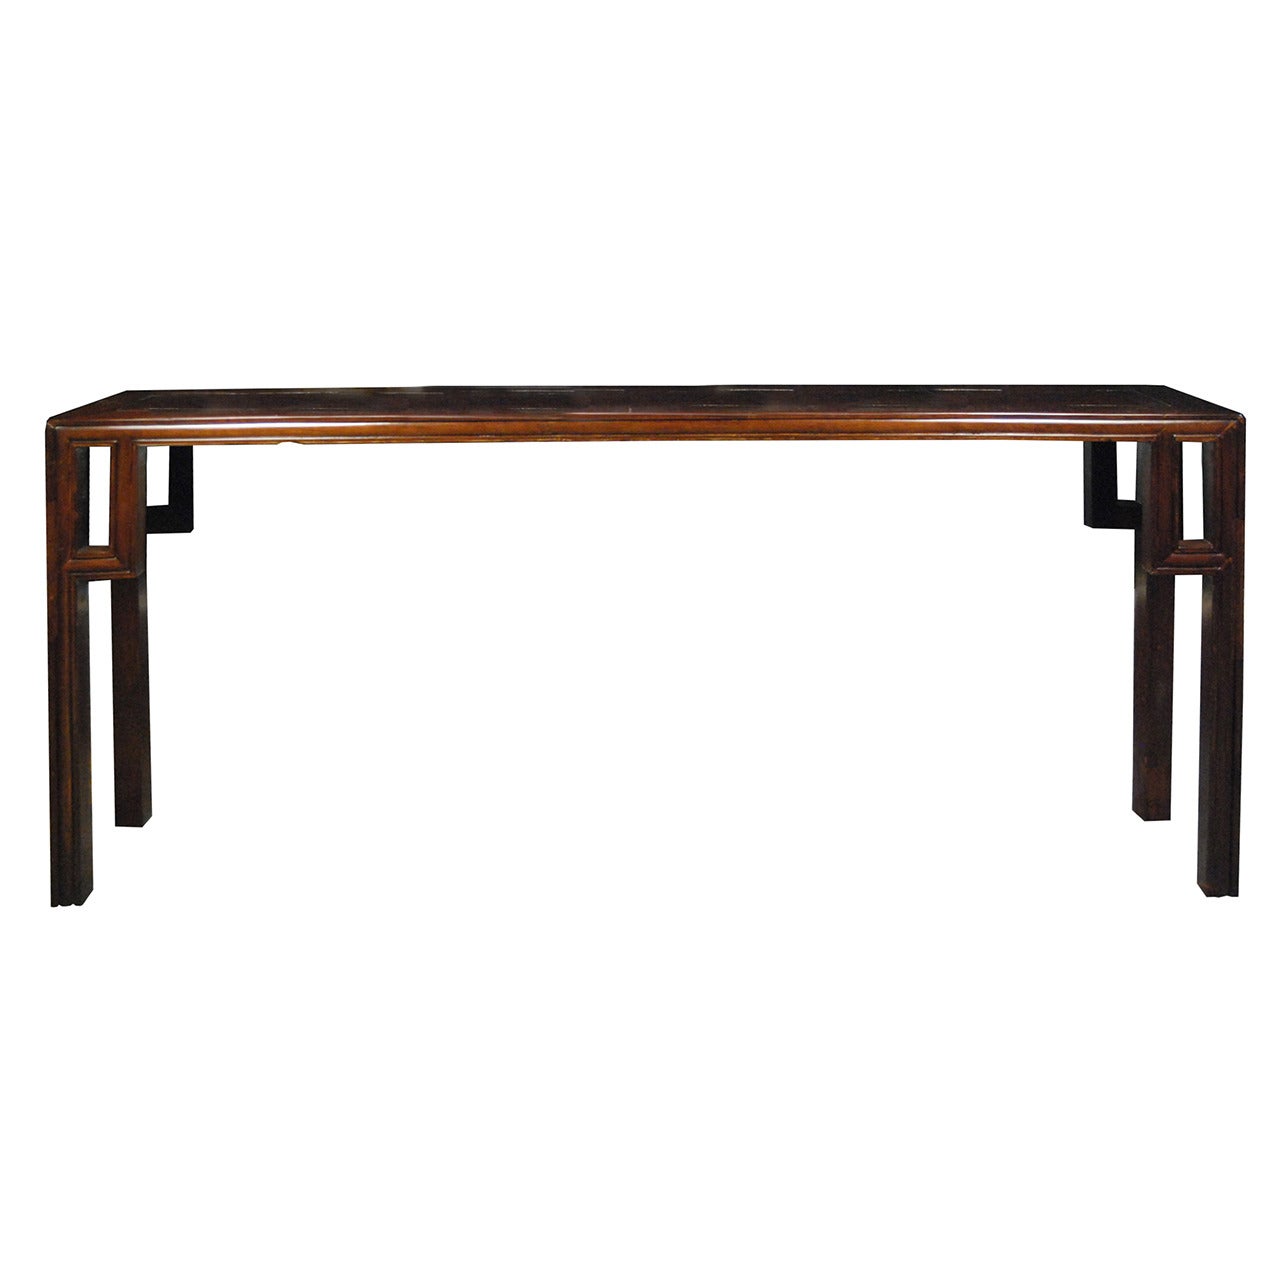 19th Century Chinese Long Altar Table with Square Spandrels